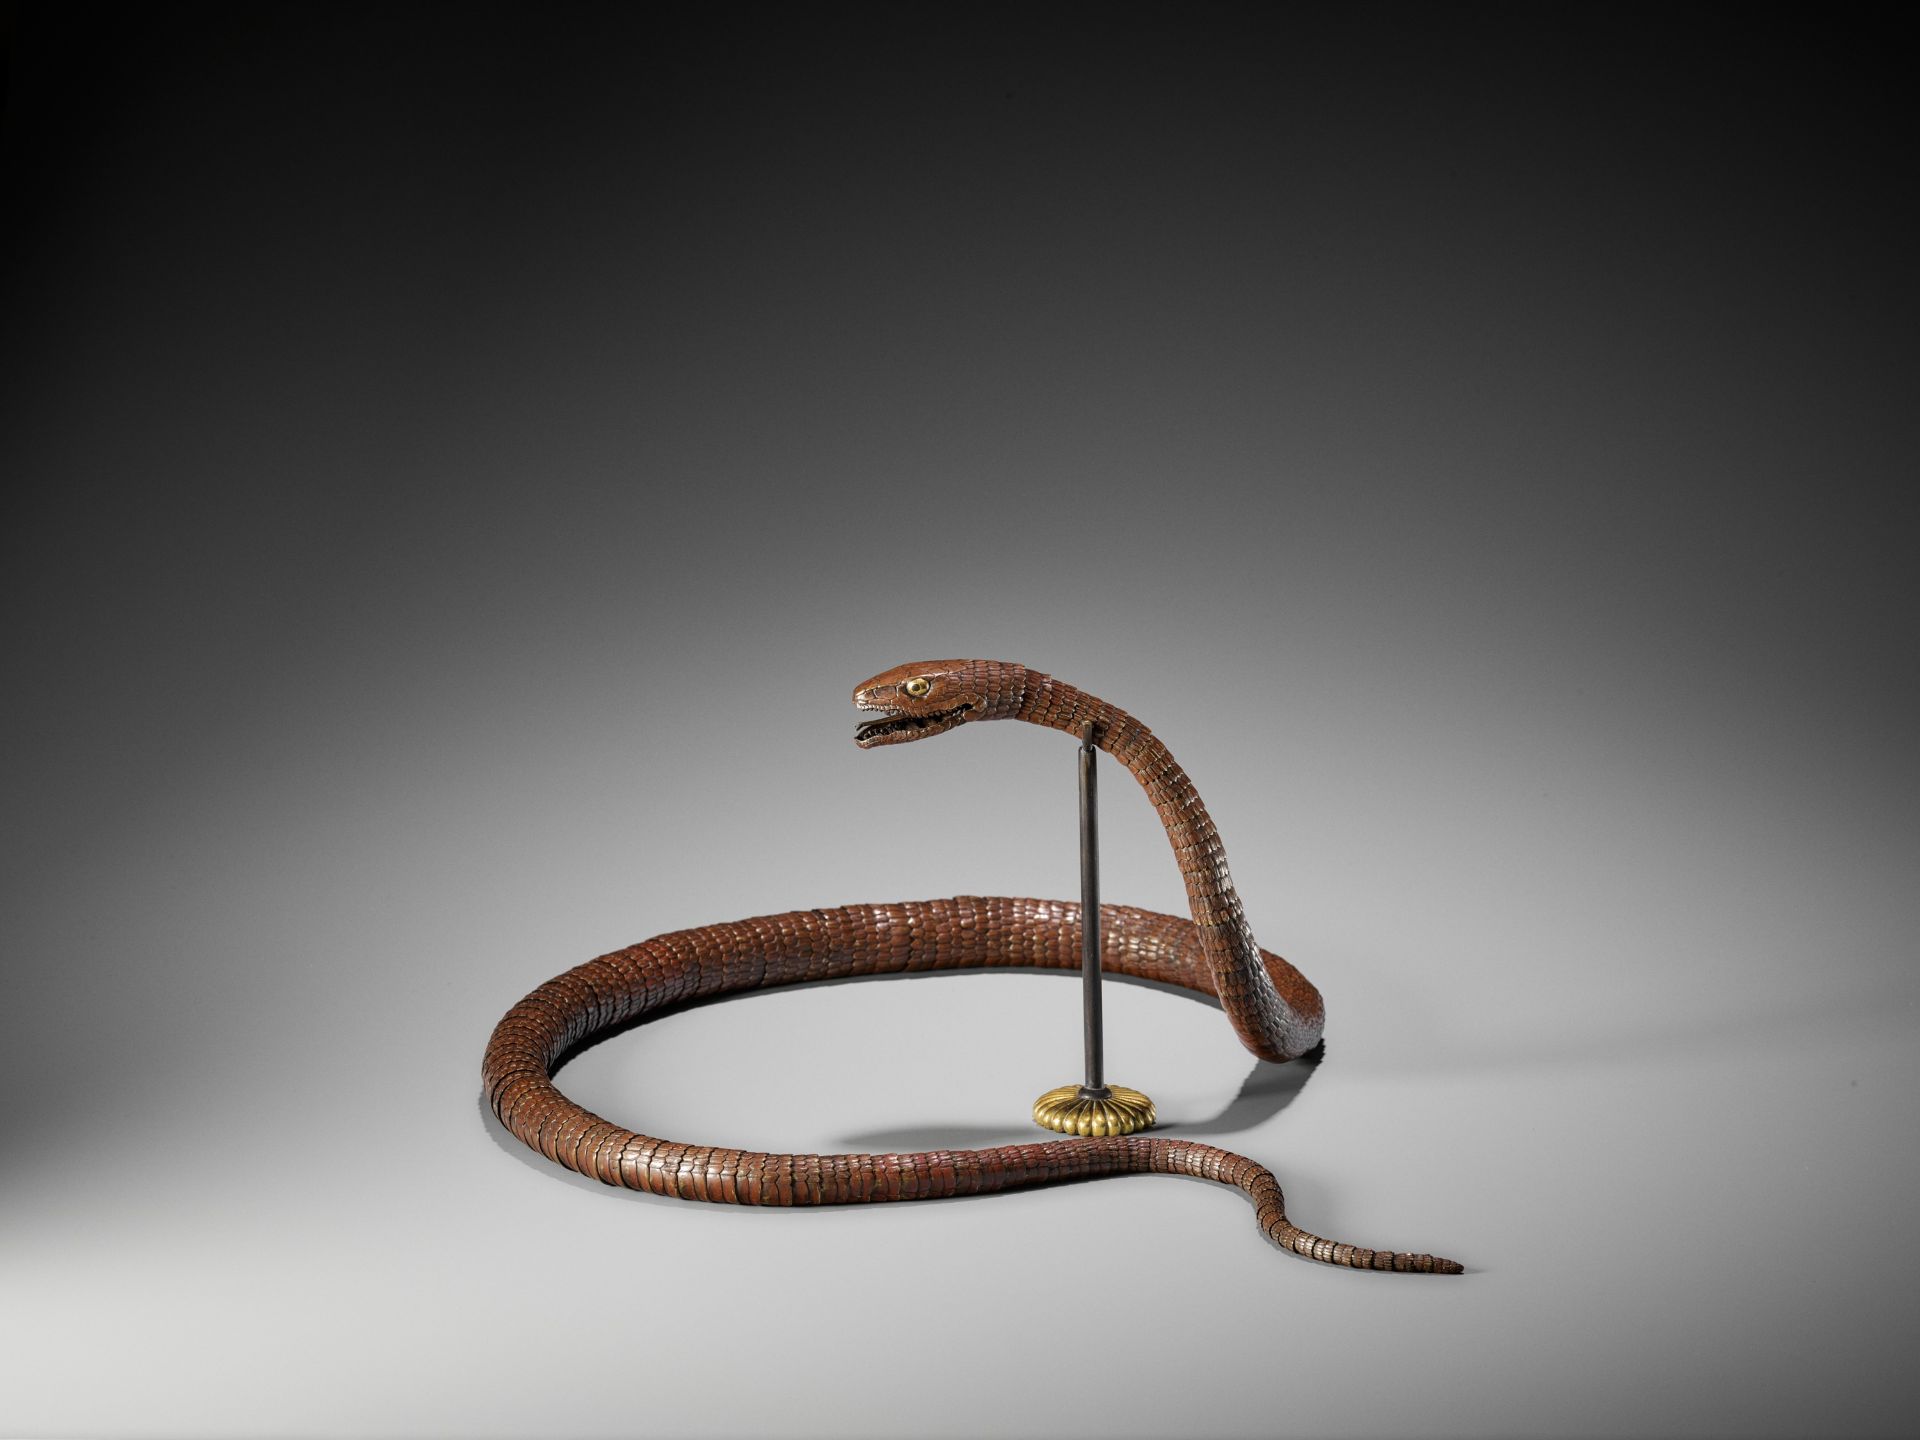 A RARE AND IMPRESSIVE PATINATED BRONZE ARTICULATED MODEL OF A SNAKE - Image 5 of 7